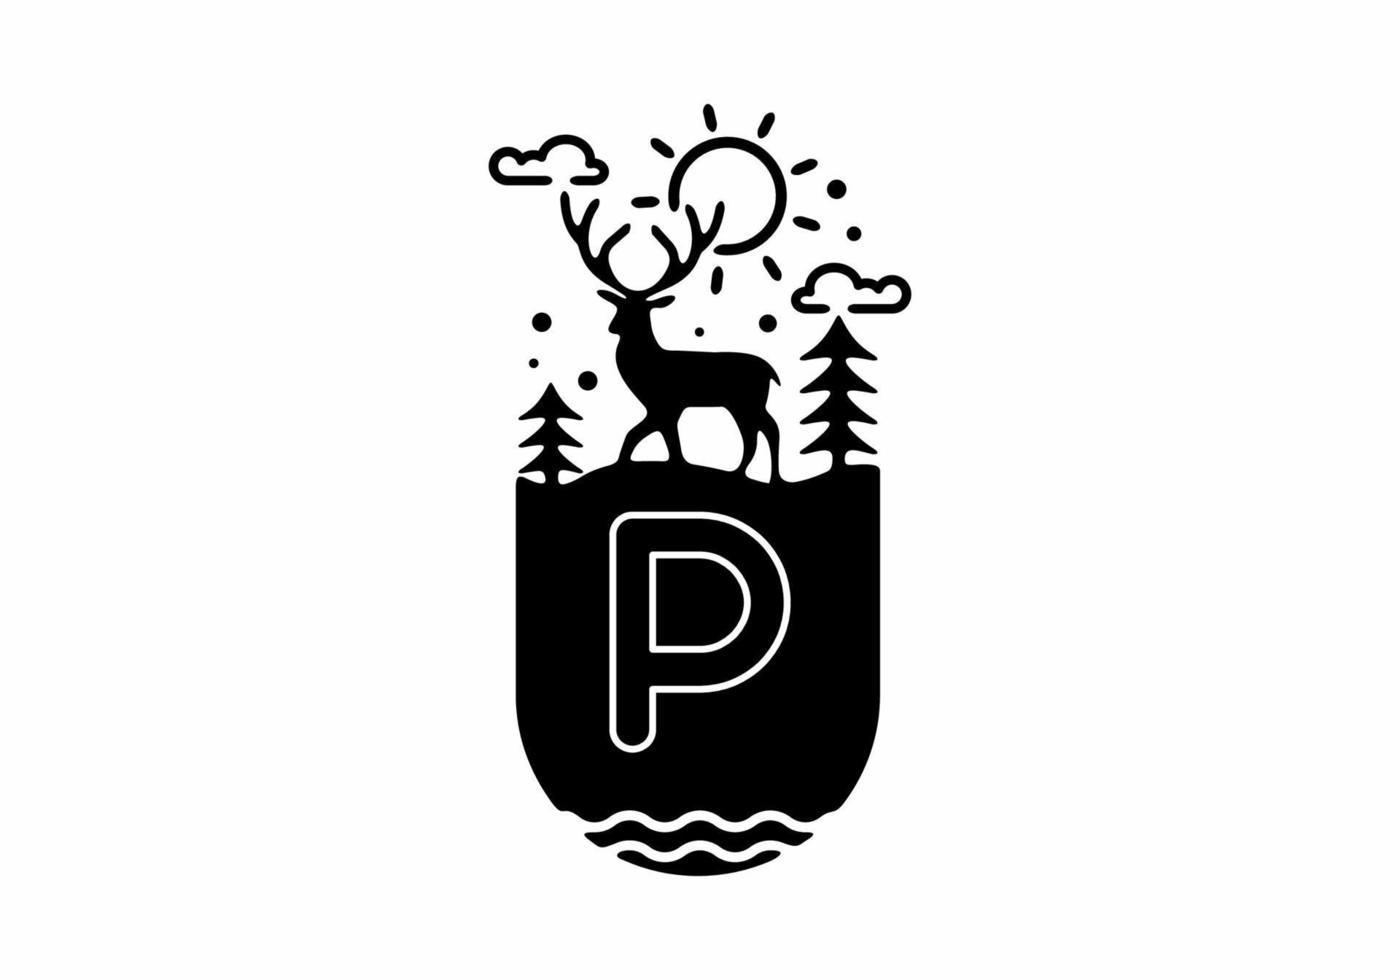 Black line art illustration of deer badge with P initial name in the middle vector